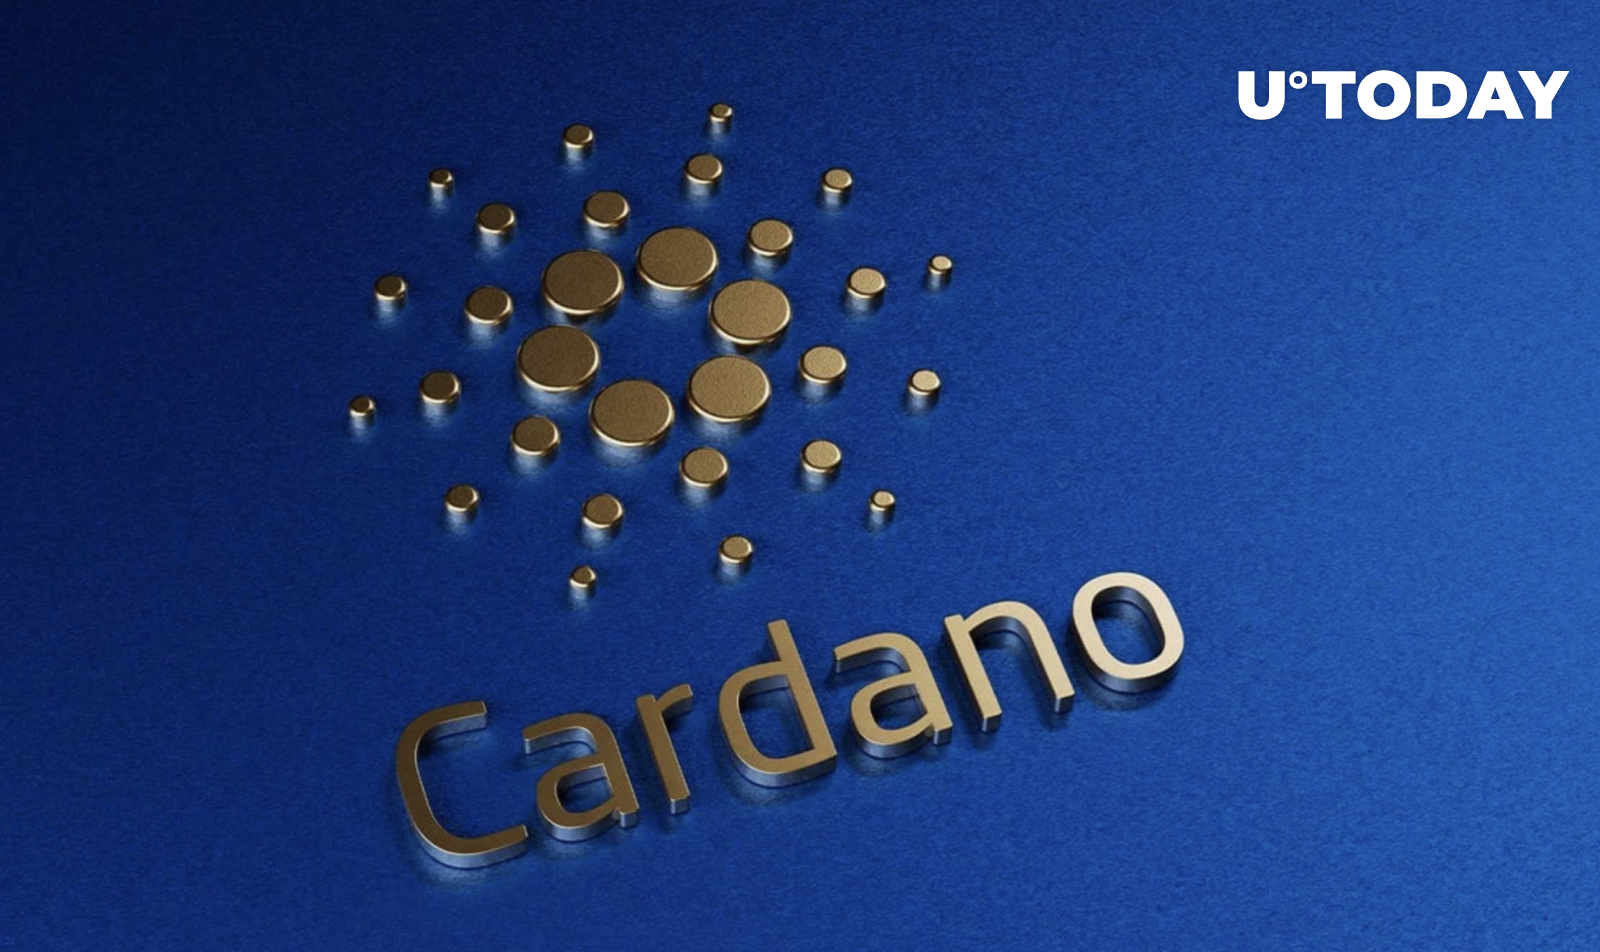 Cardano DeFi Boom Results in More Than 2 Million Transactions in Less Than a Month